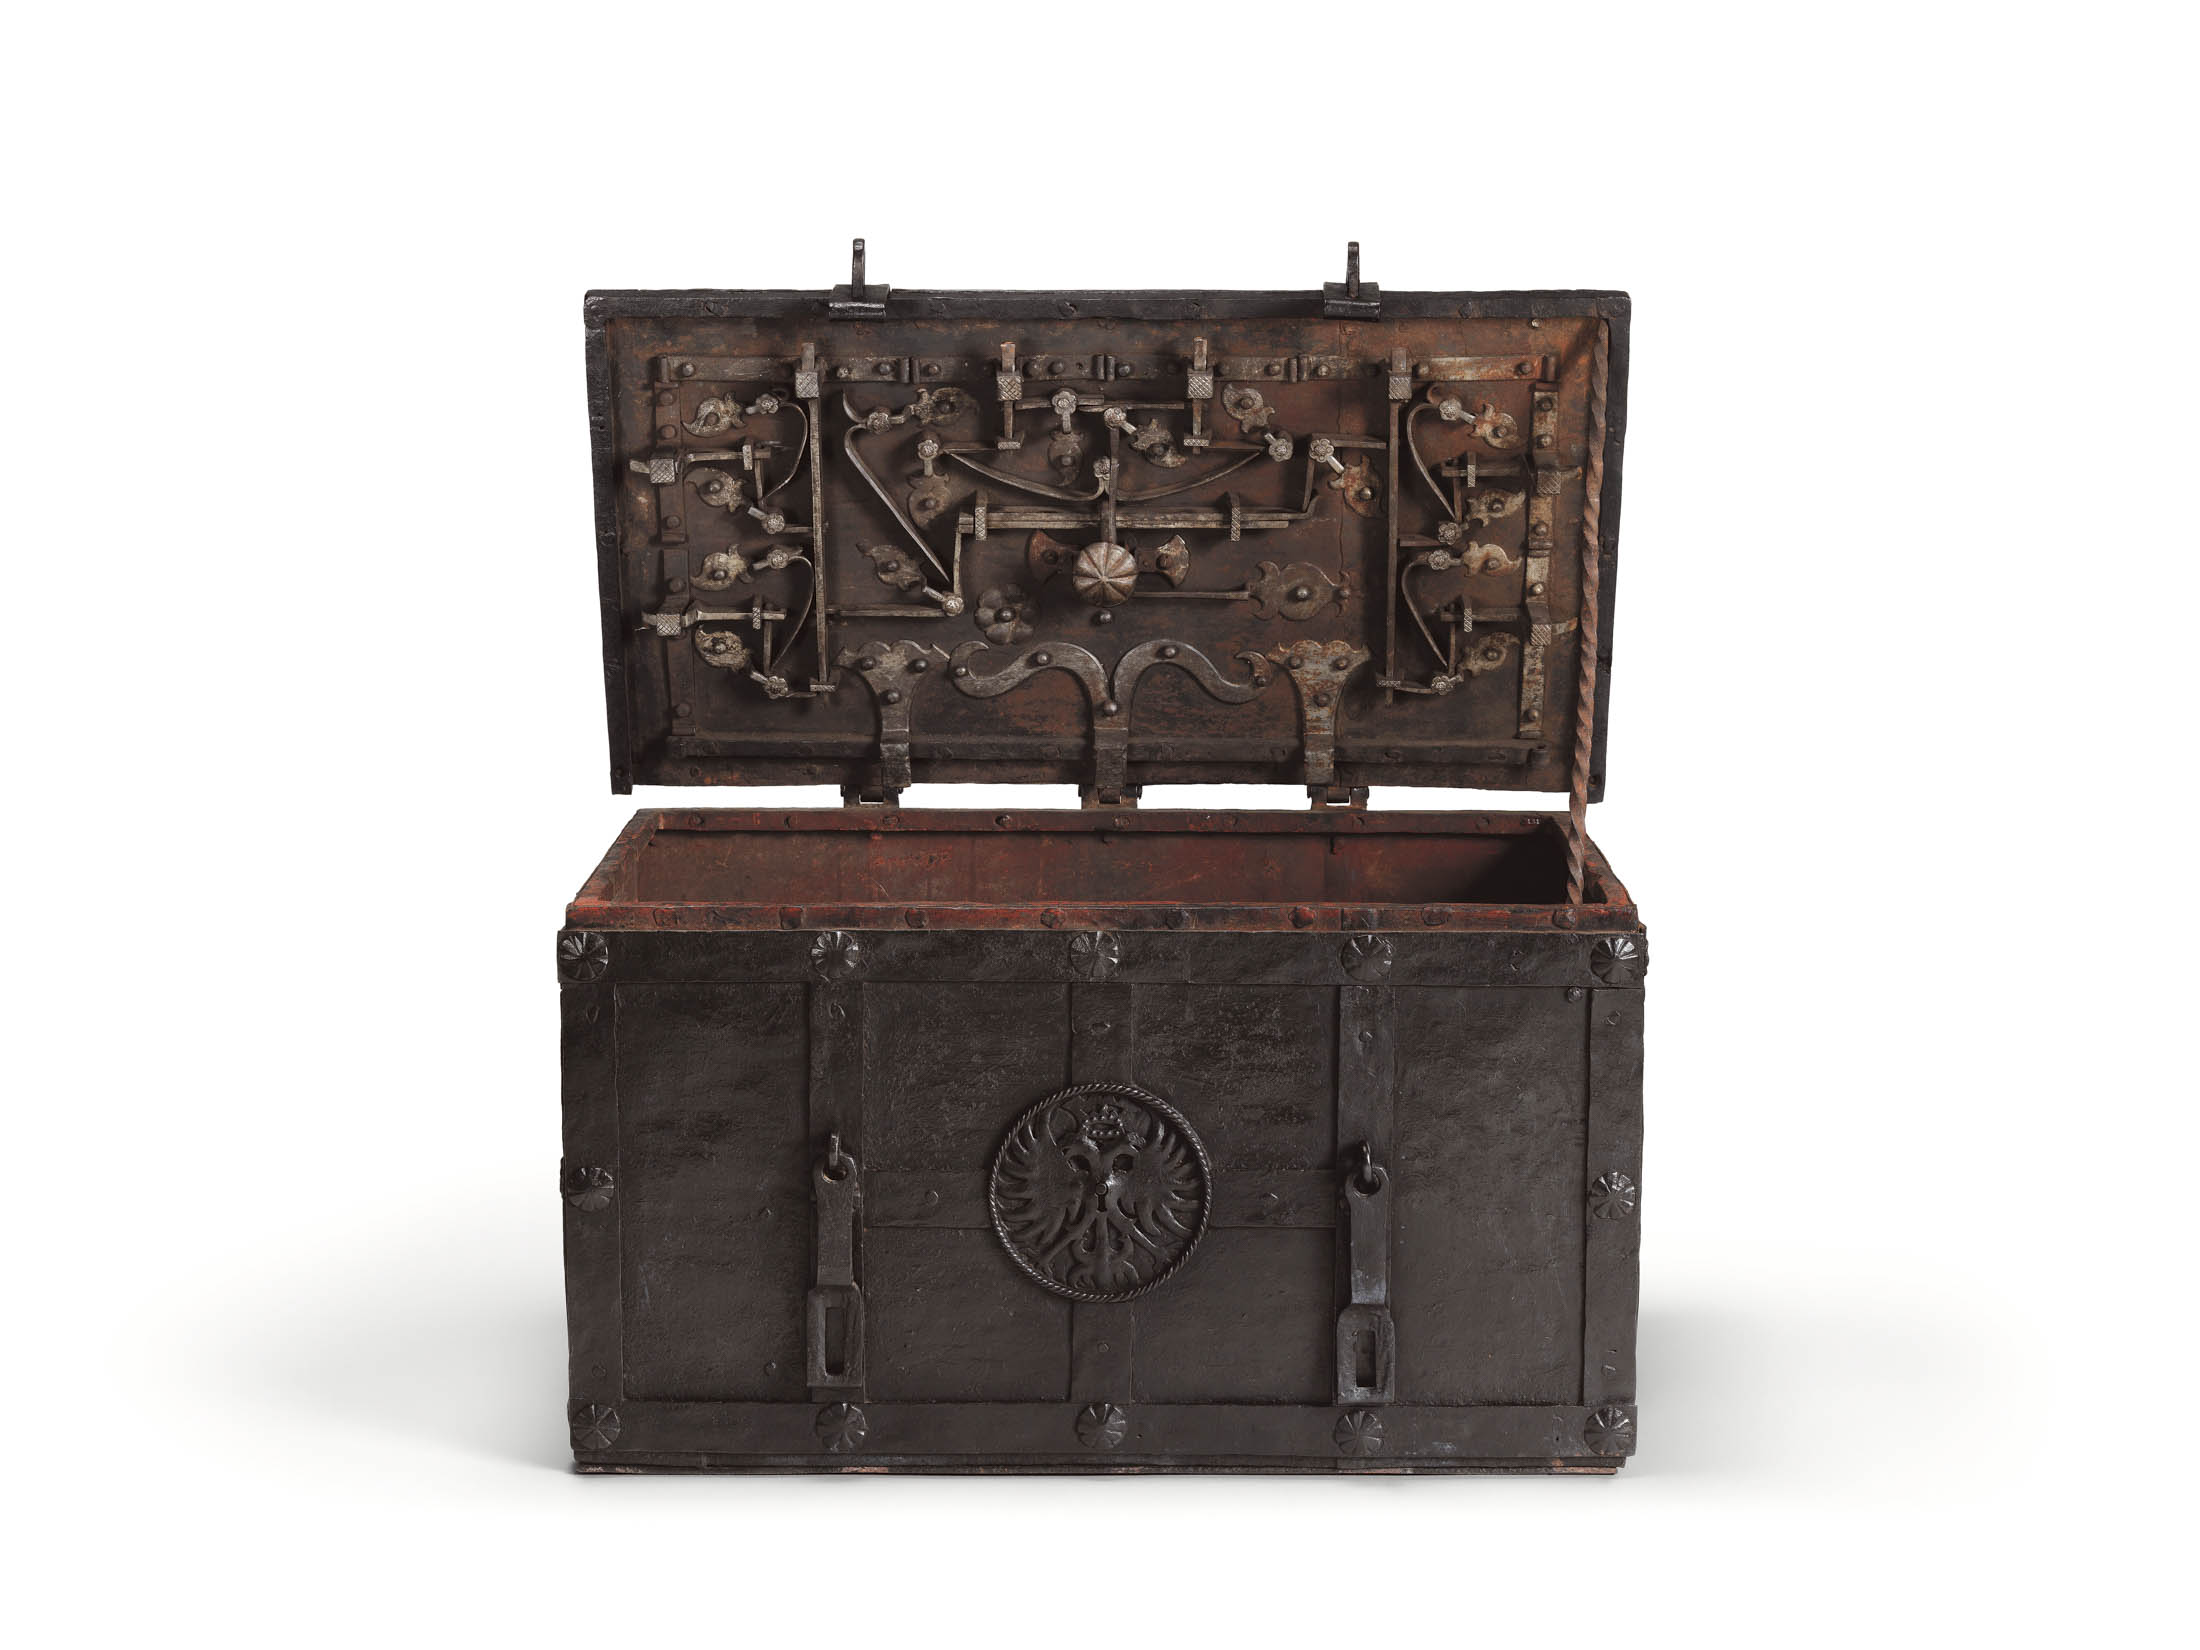 Cabinet Of Wonders, The Gaston-Louis Vuitton Collection English